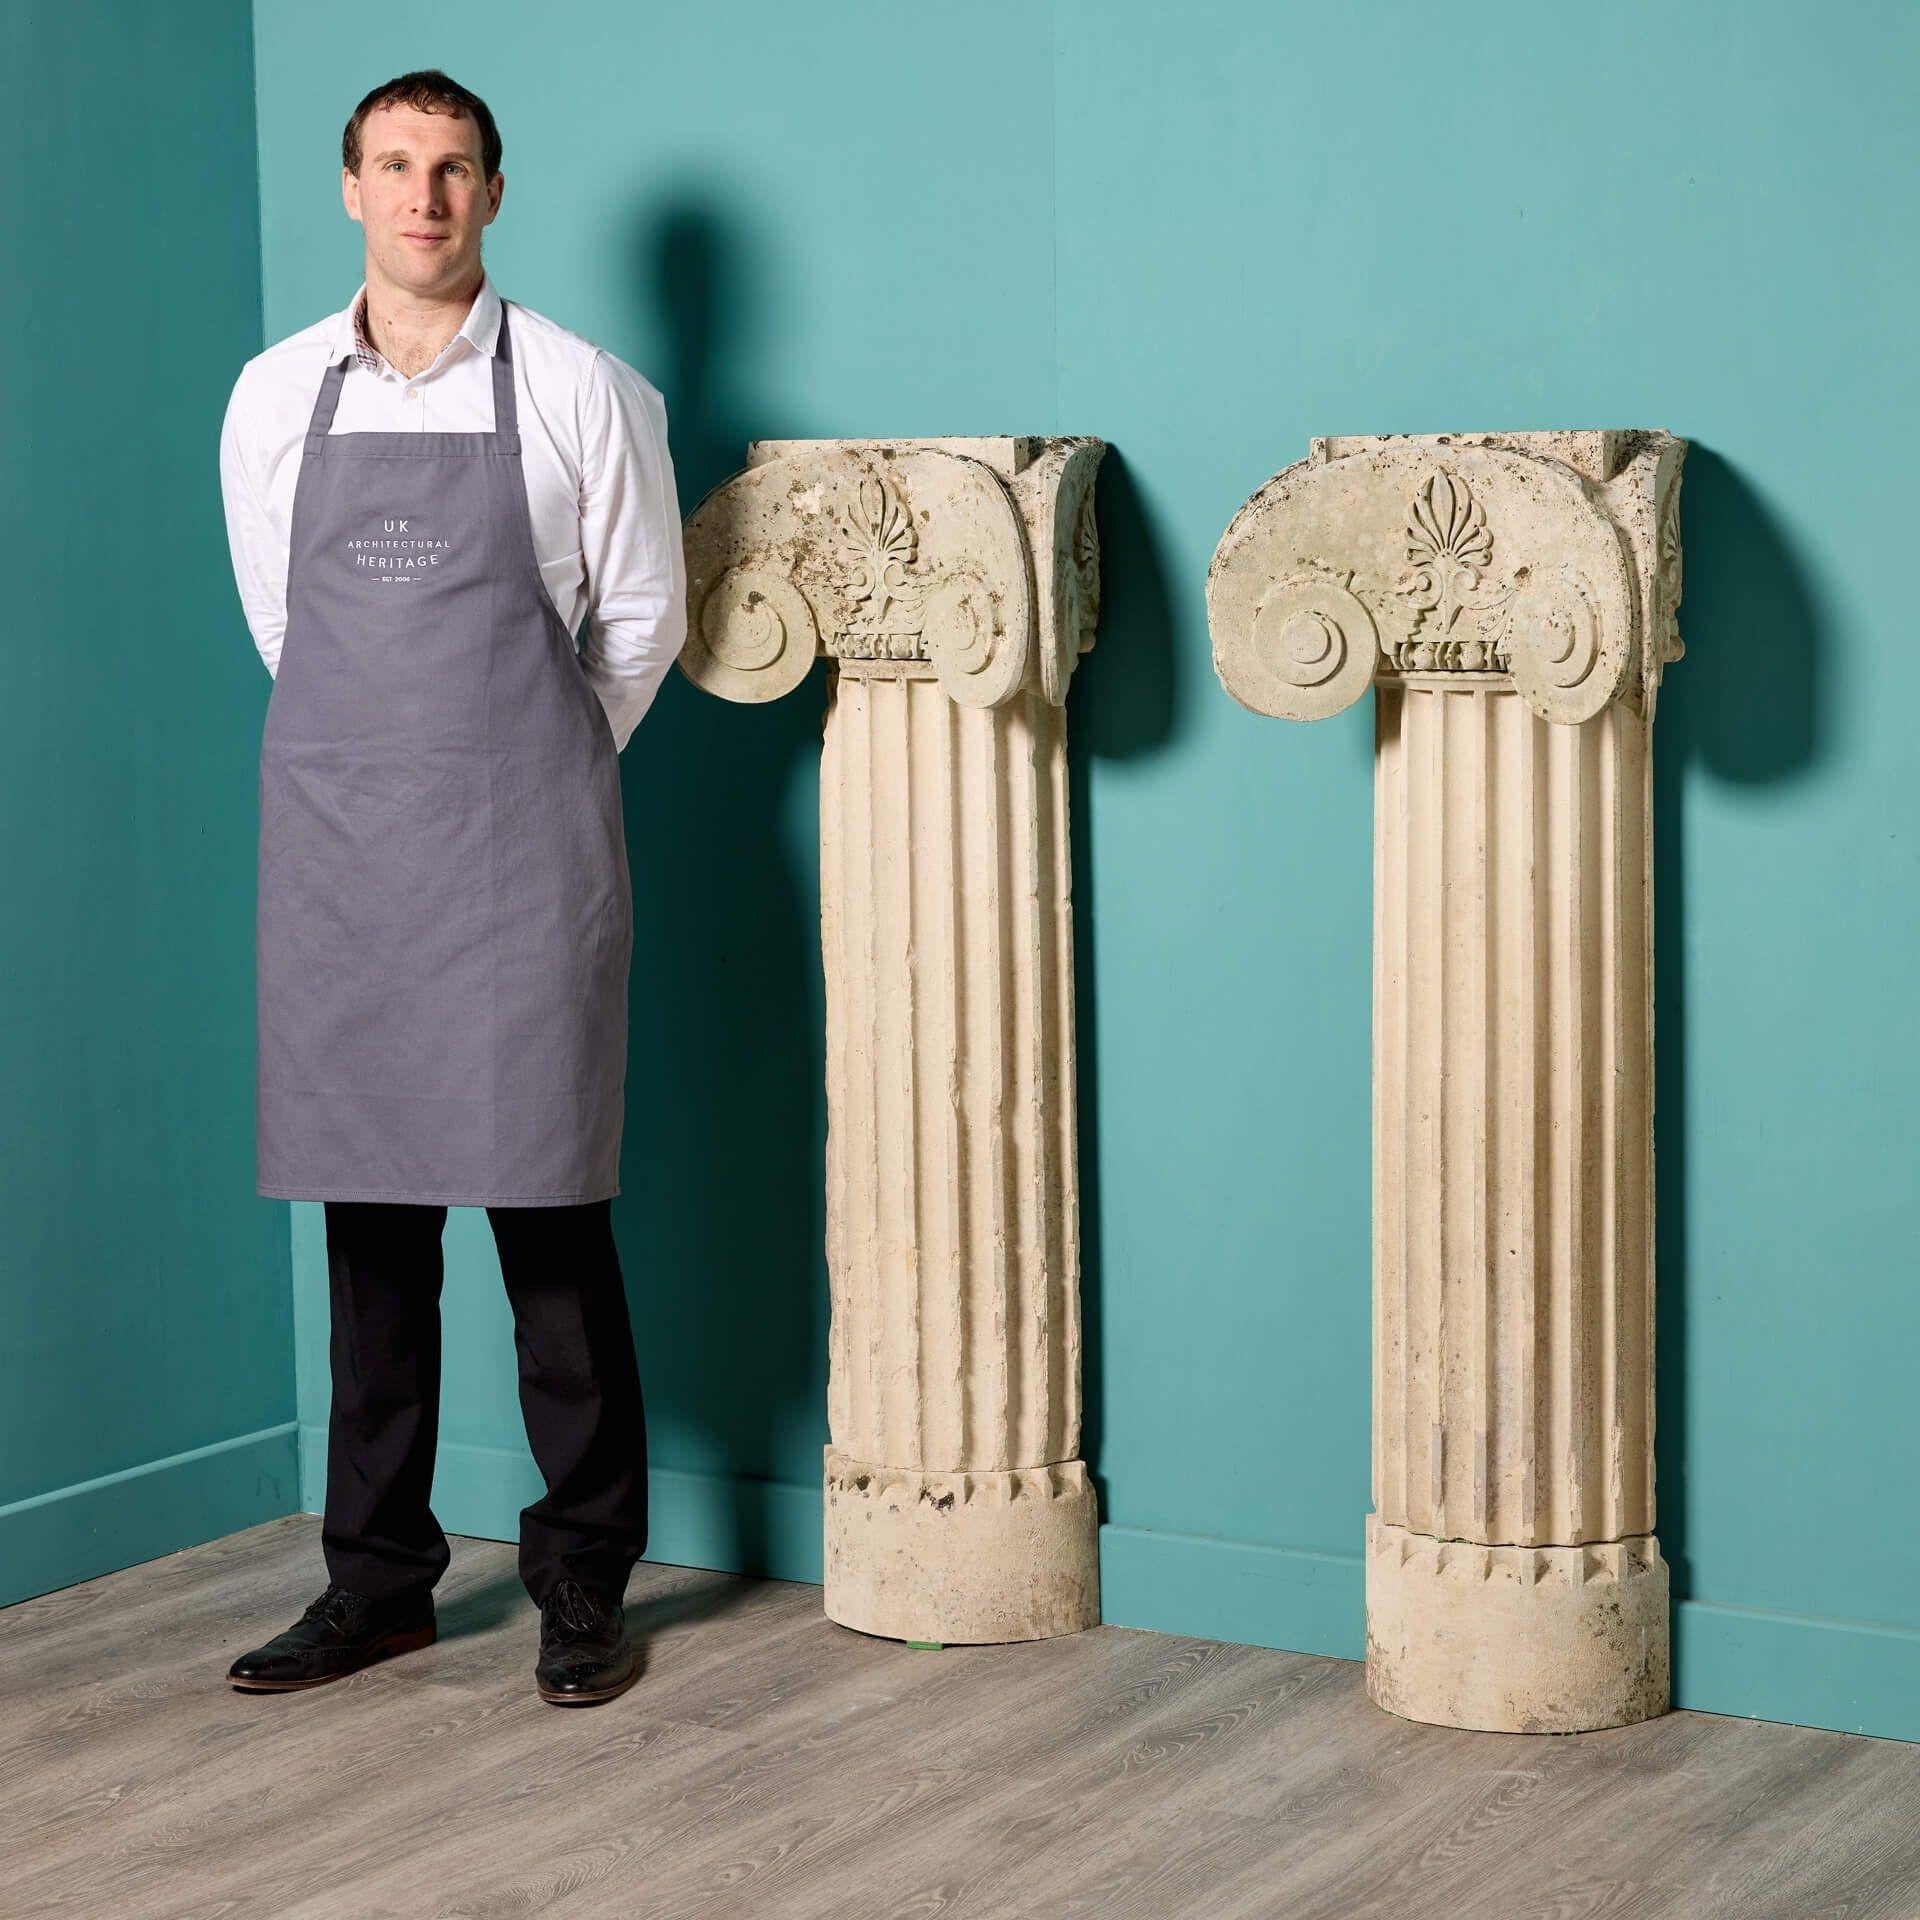 A spectacular pair of English Greek style Portland limestone ionic column pedestals dating to circa 1800. Suitable for use as display plinths or simply architectural features, these 220-year-old late Georgian stone columns are evocative of the great